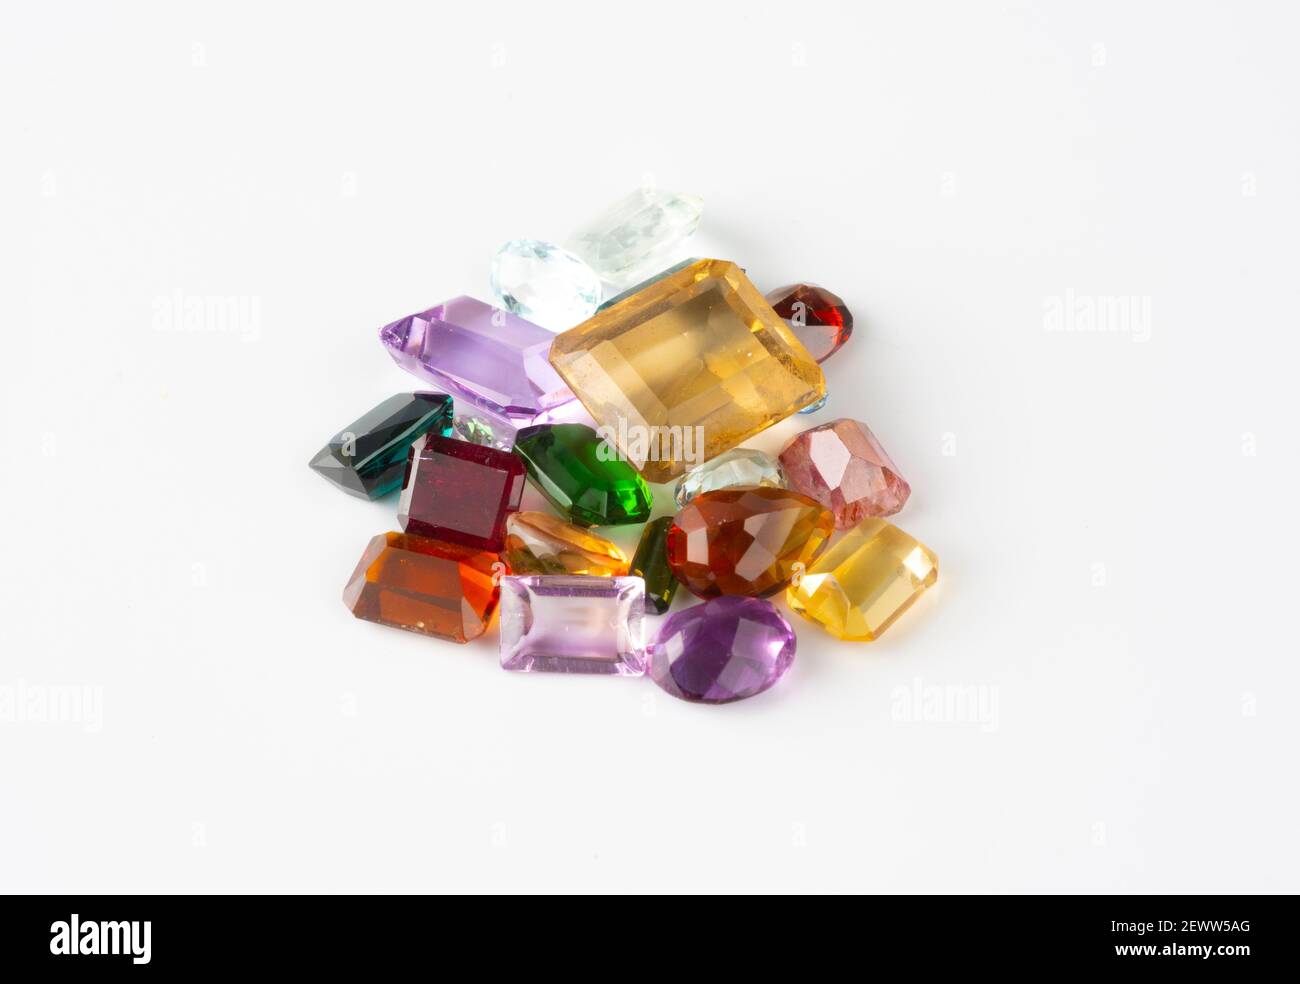 Group of precious stones and gems over white background. Stock Photo